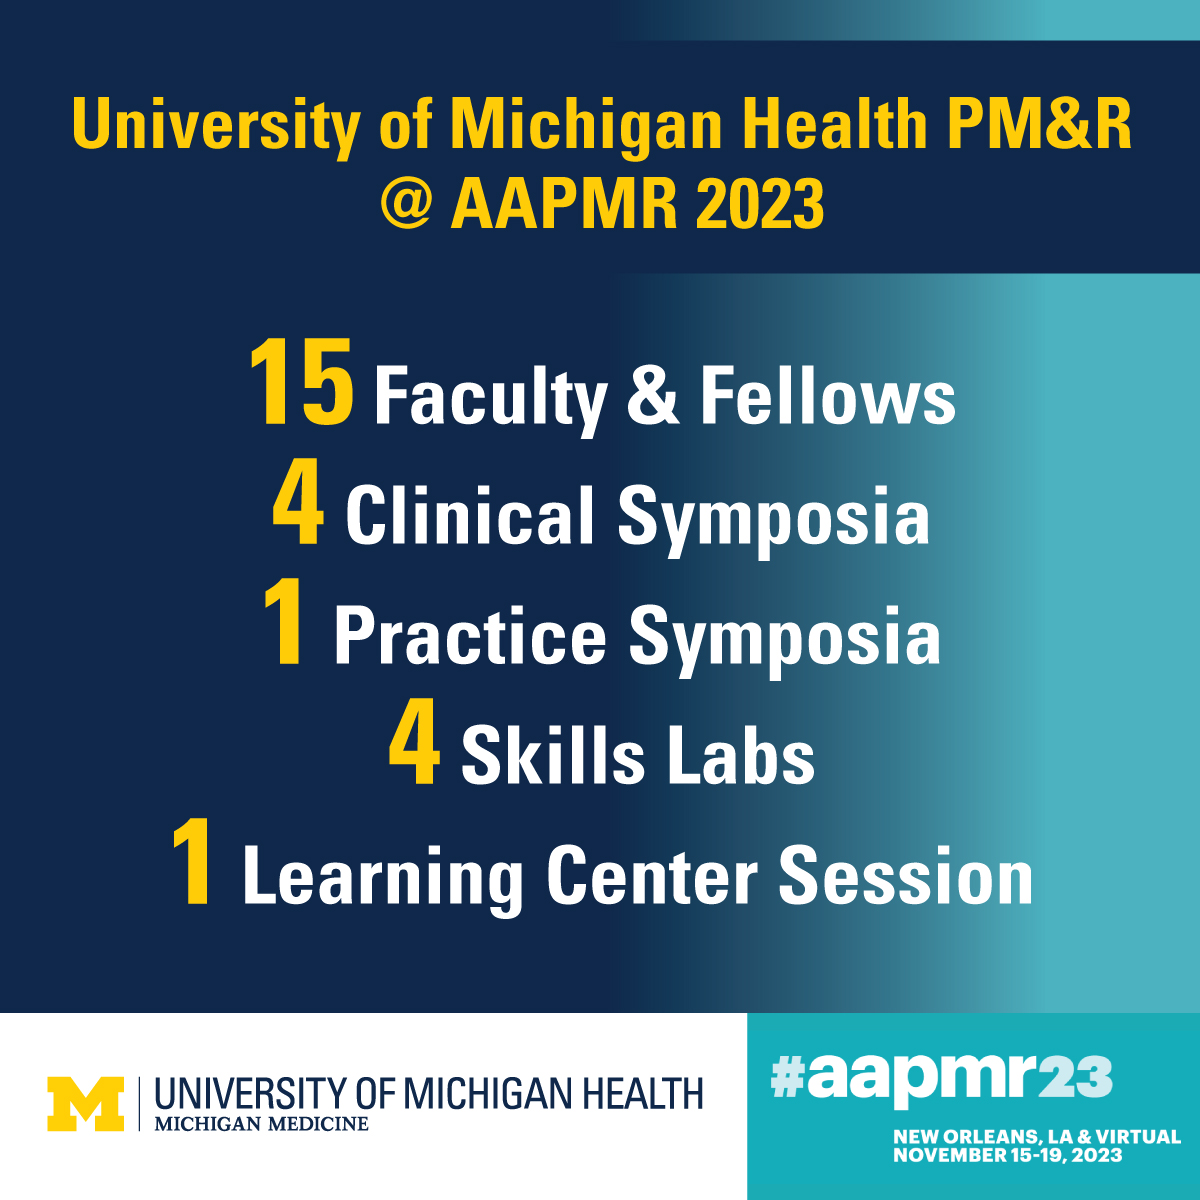 Overview of PM&R's involvement in the 2023 AAPMR Conference. 15 Faculty and Fellows attended, 4 clinical symposia, 1 practice symposia, 4 skills labs and 1 Learning Center Session were held 